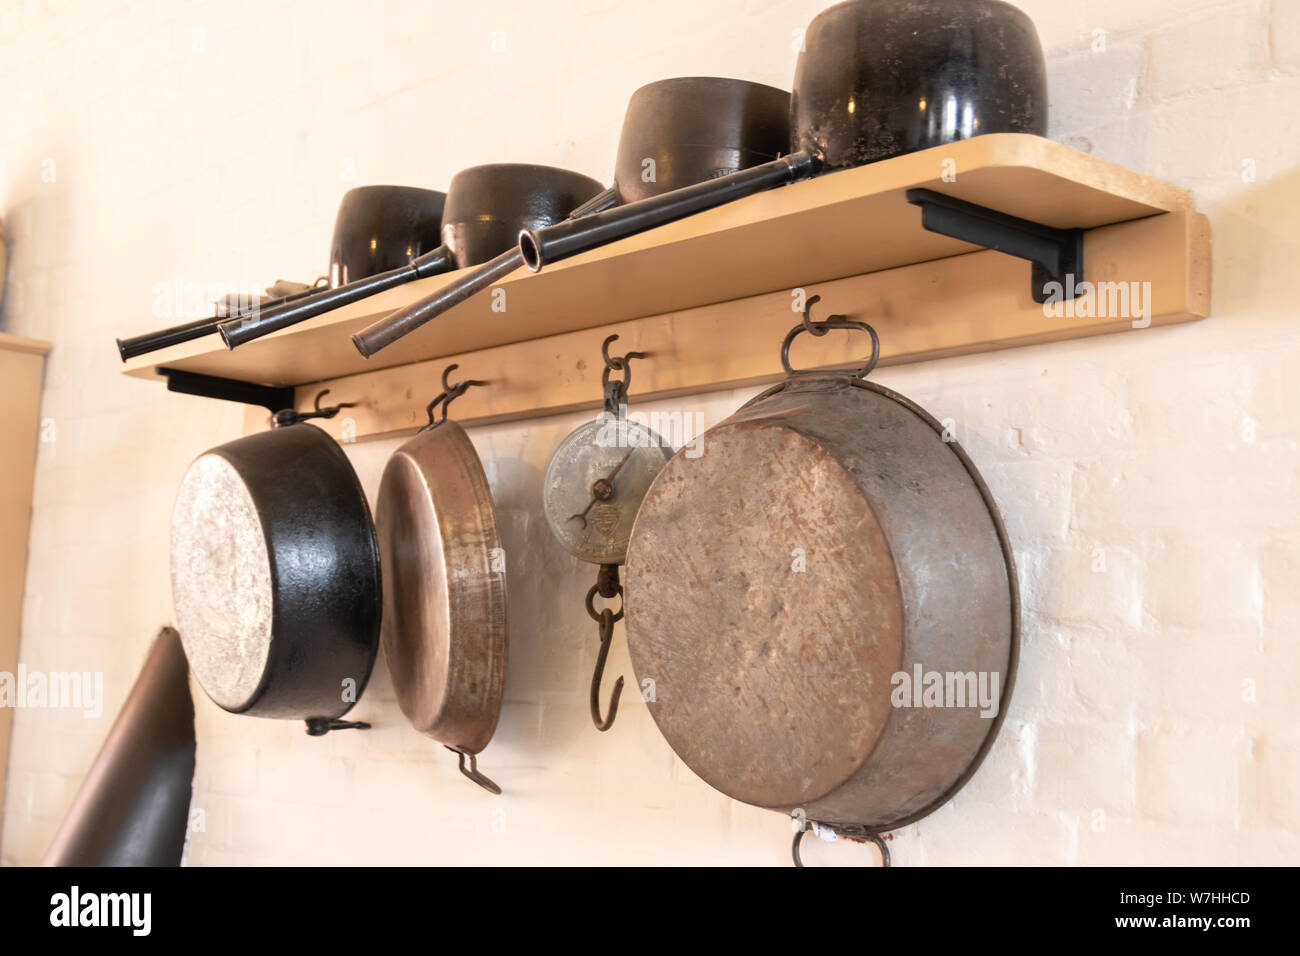 https://c8.alamy.com/comp/W7HHCD/vintage-pots-and-pans-hanging-on-a-wall-in-an-old-kitchen-W7HHCD.jpg